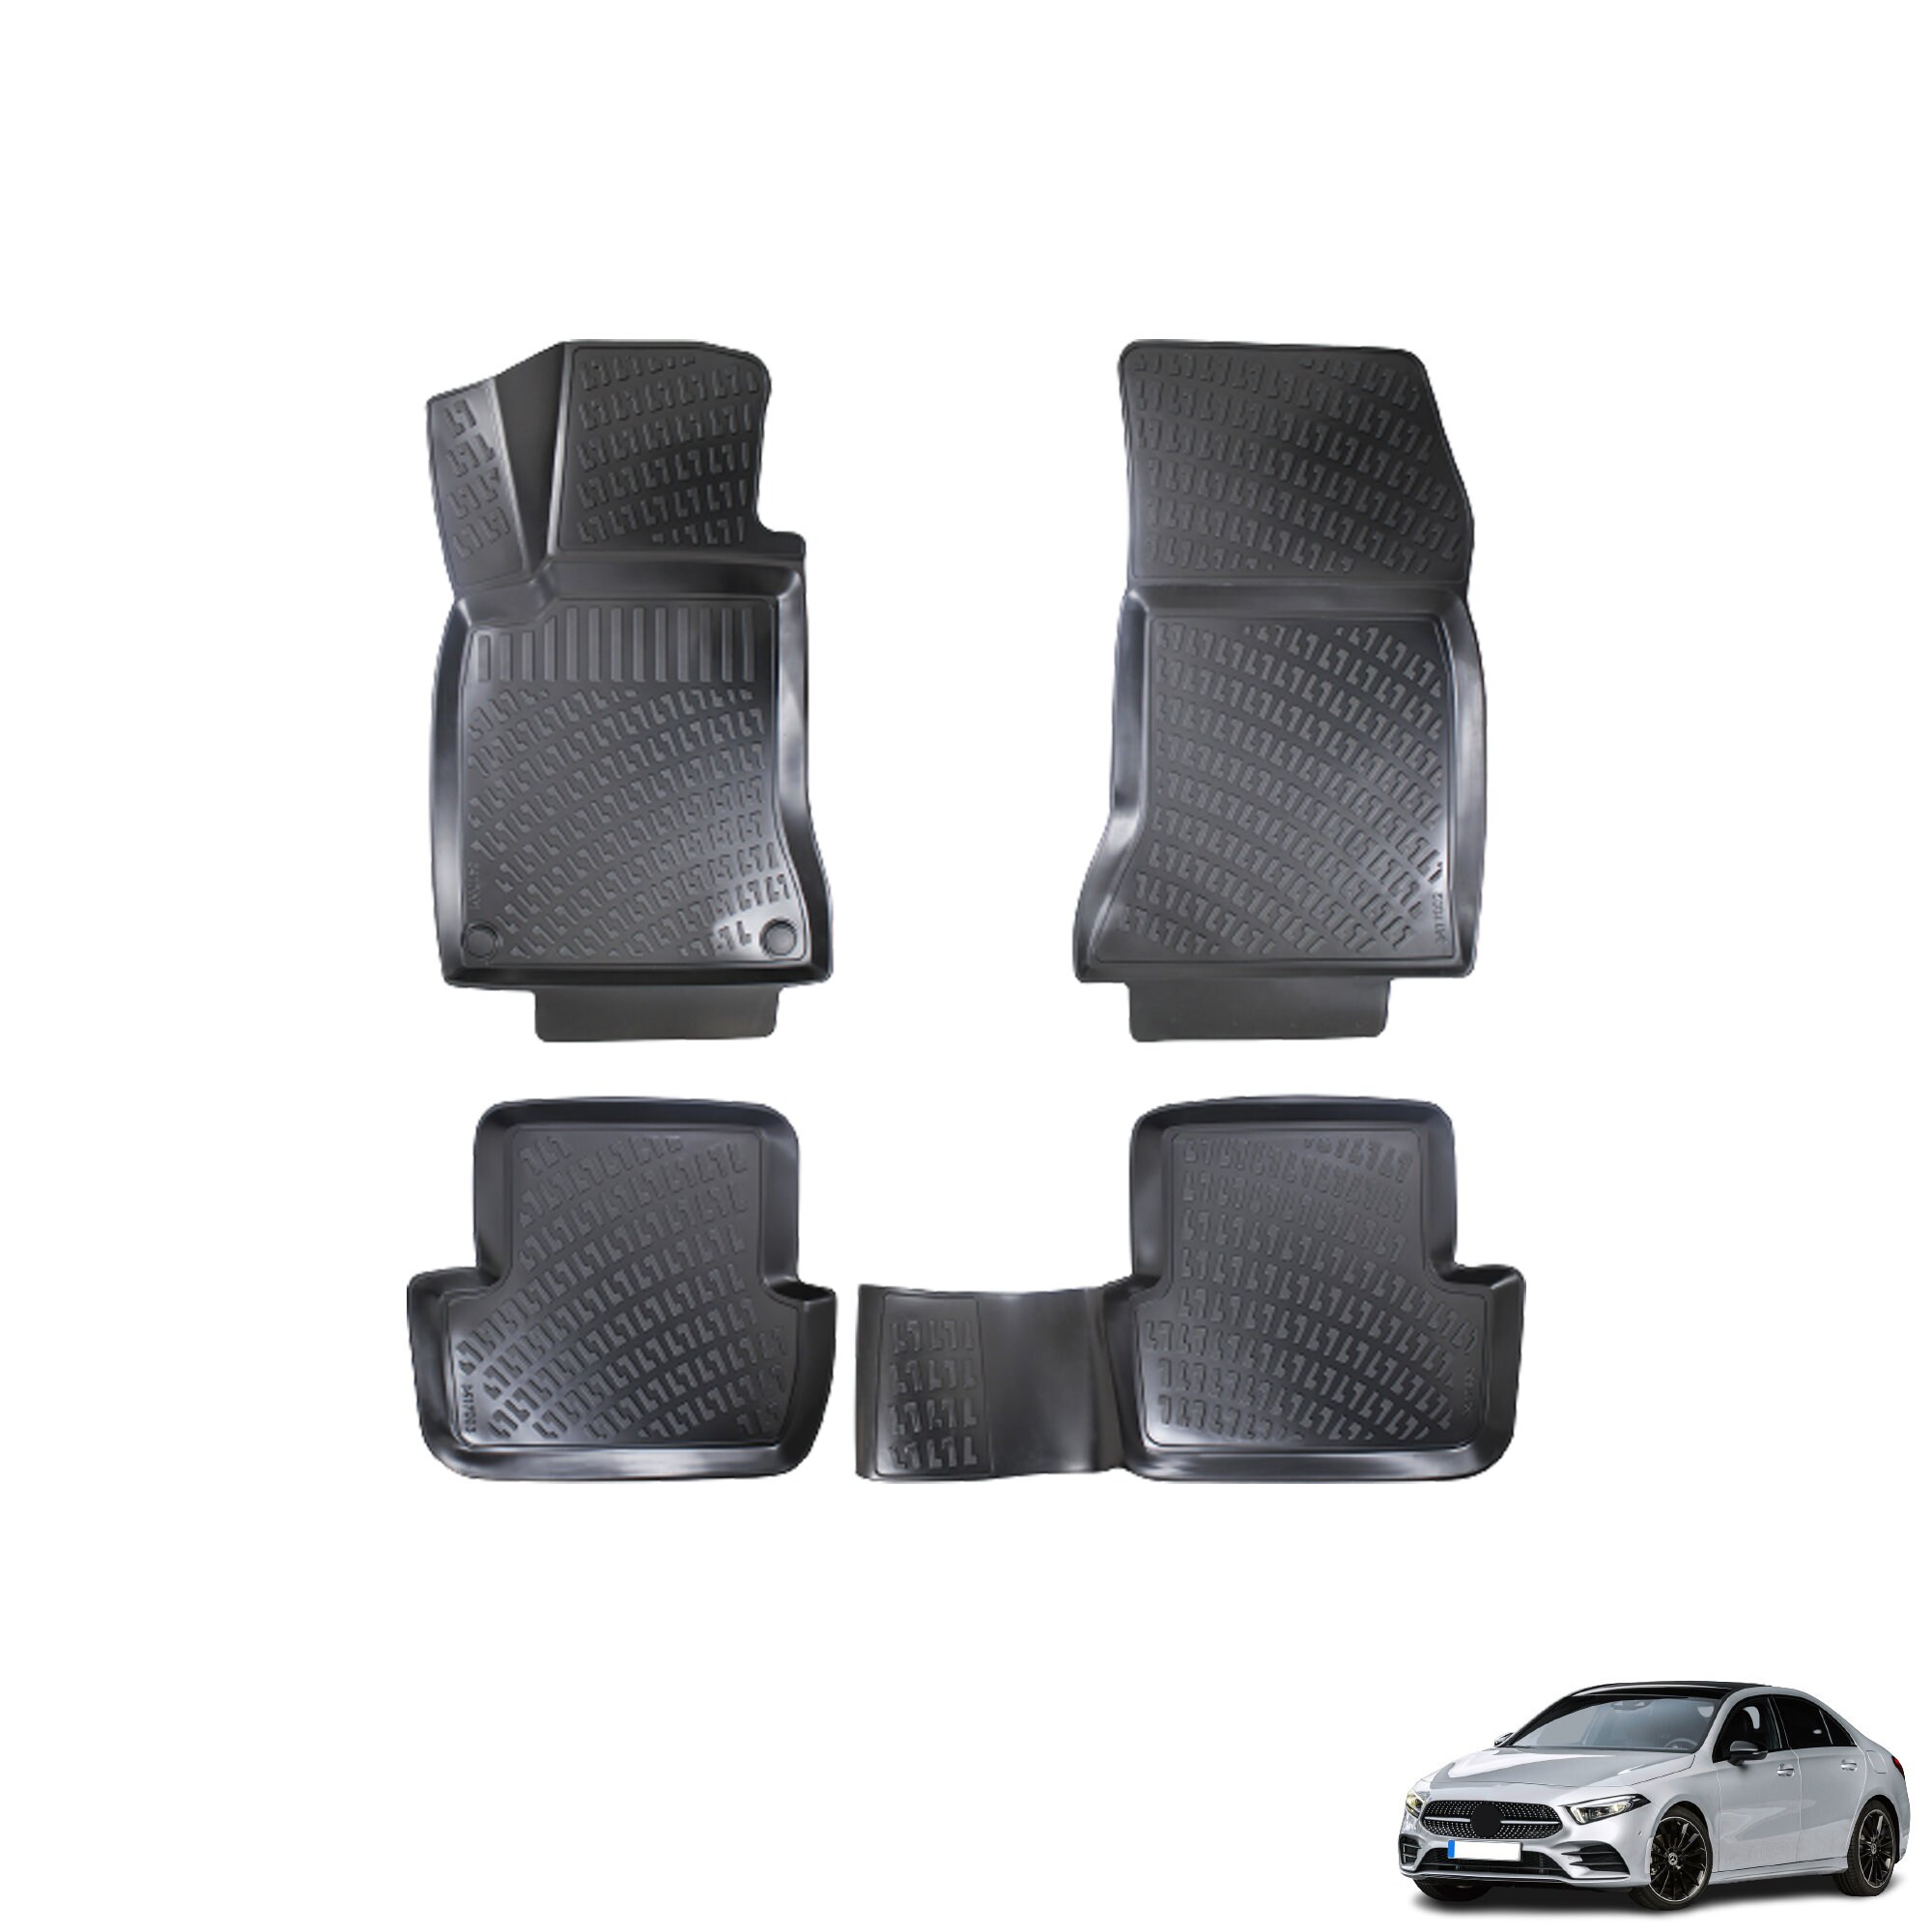 Tailored suitcase kit for Mercedes A Class W177 (2019-Current)